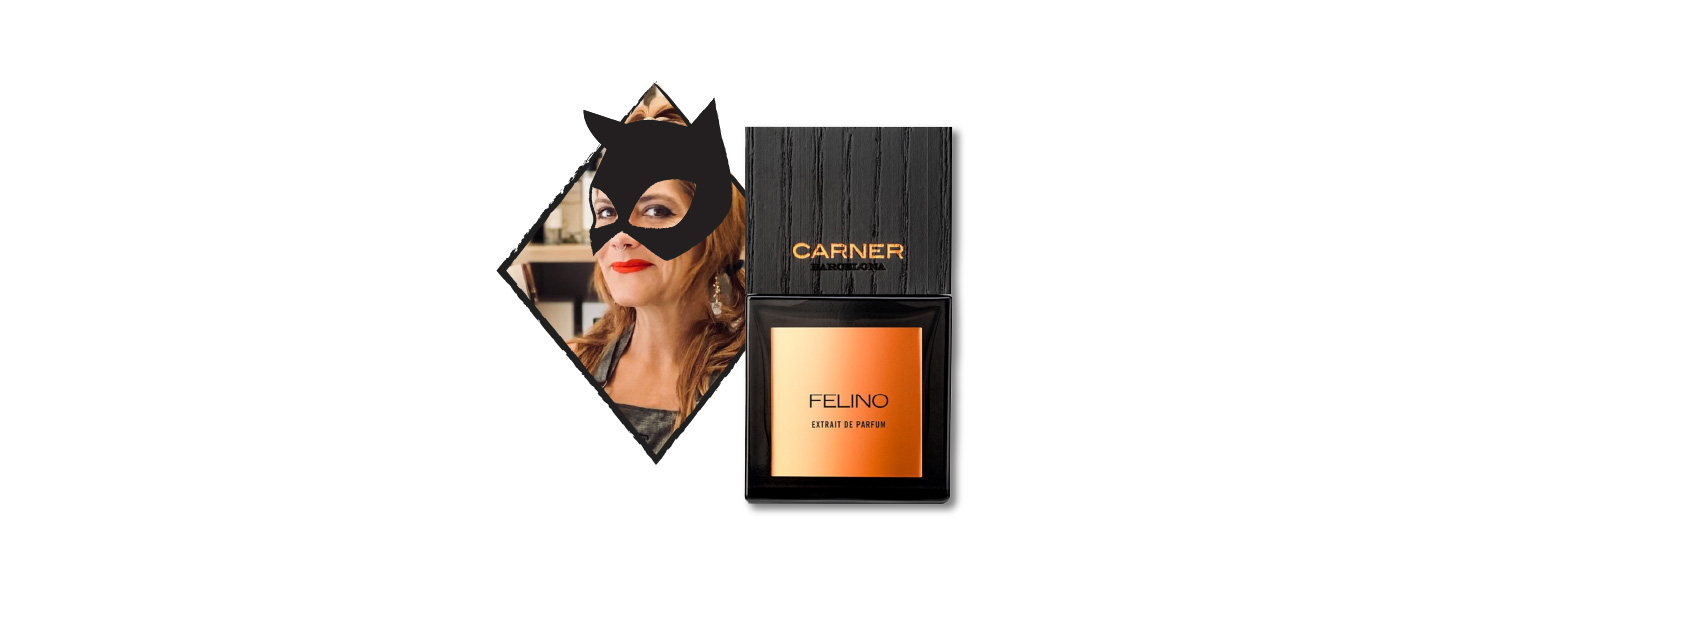 bottle of felino by carner barcelona and clea from the lore team as catwoman